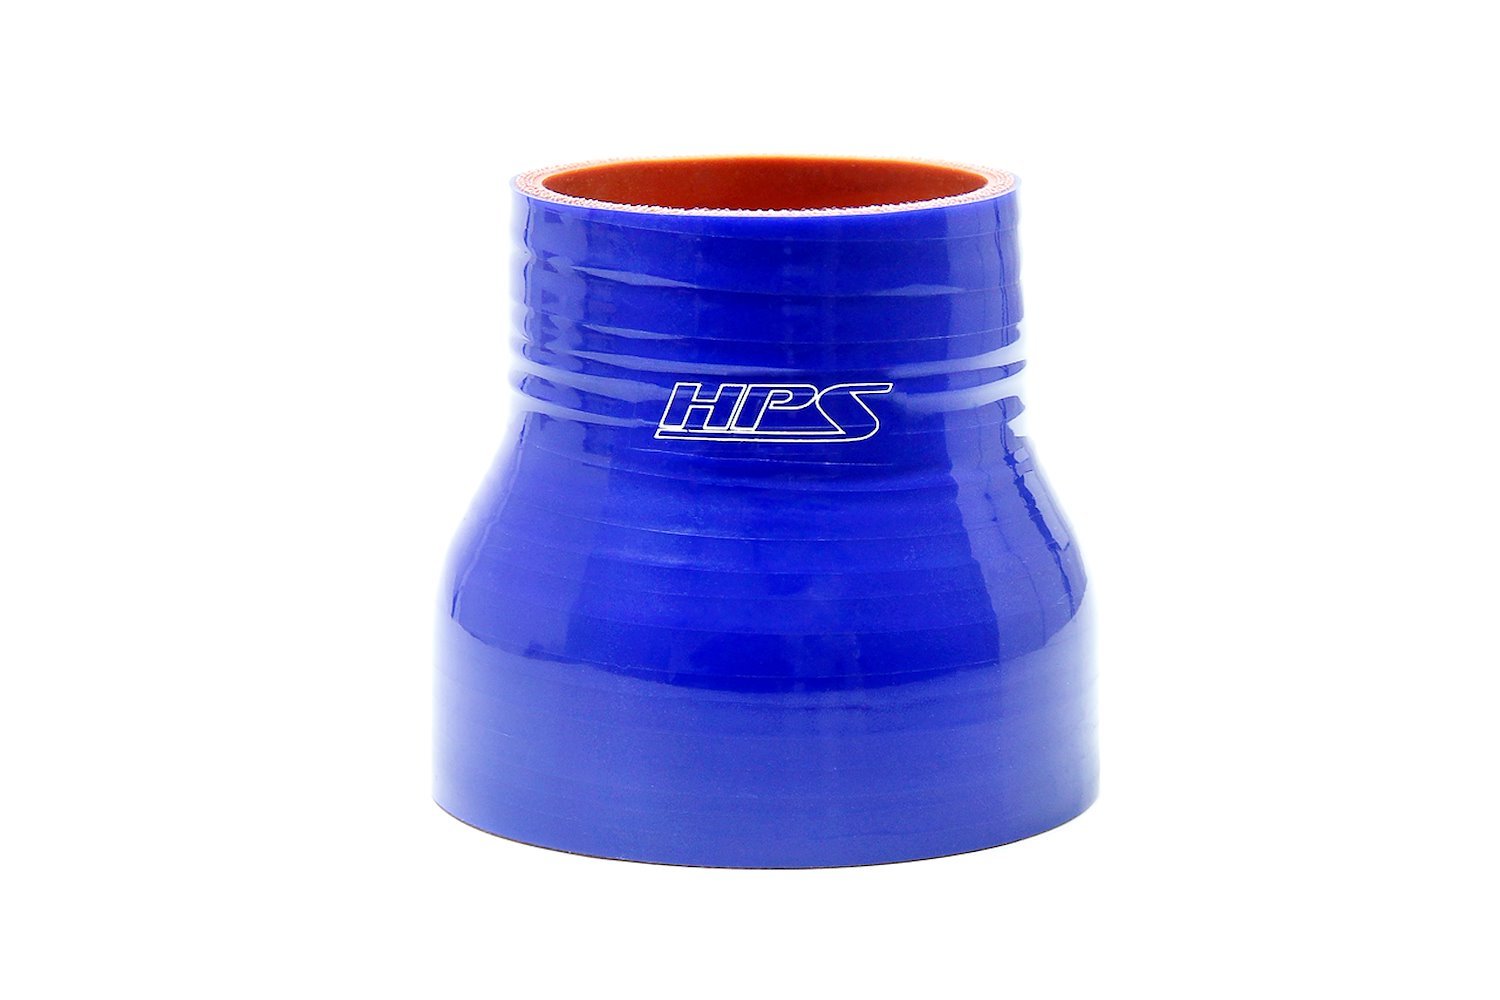 HTSR-075-138-BLUE Silicone Reducer, High-Temp 4-Ply Reinforced, 3/4 in. ID To 1 3/8 in. ID, 3 in. Length.